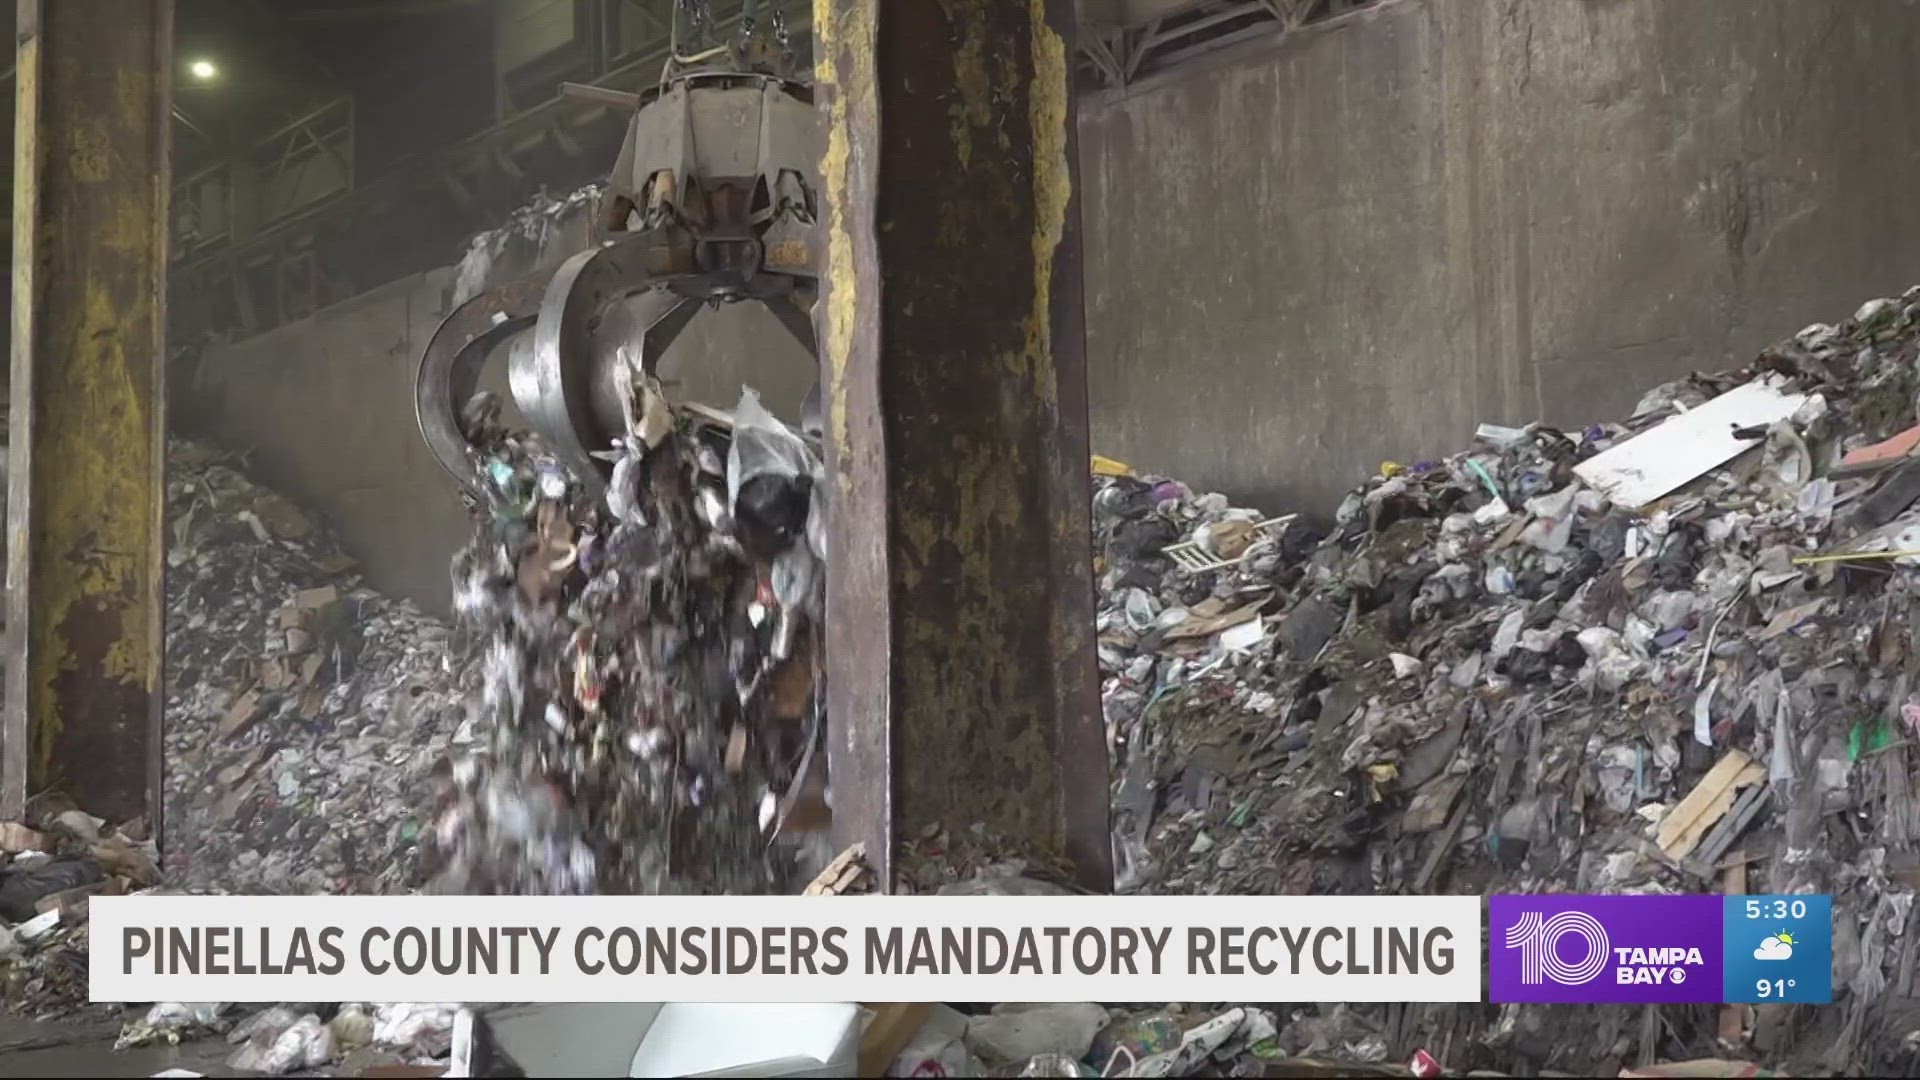 Revisions to the solid waste ordinance are needed to help the county reach a vision of zero waste to landfill by 2050.